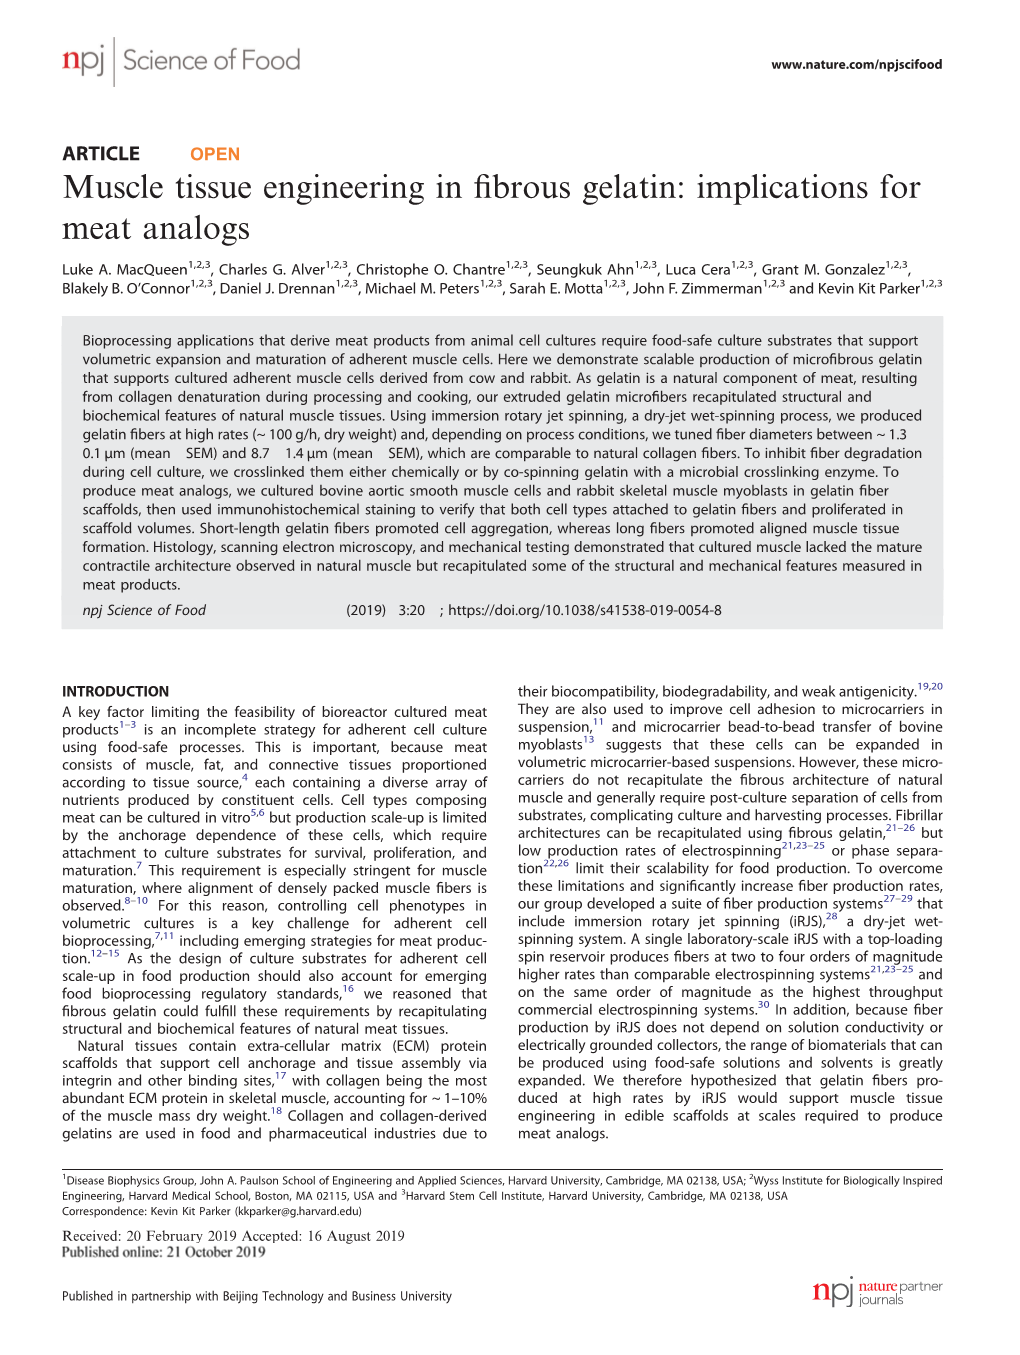 Muscle Tissue Engineering in Fibrous Gelatin: Implications for Meat Analogs